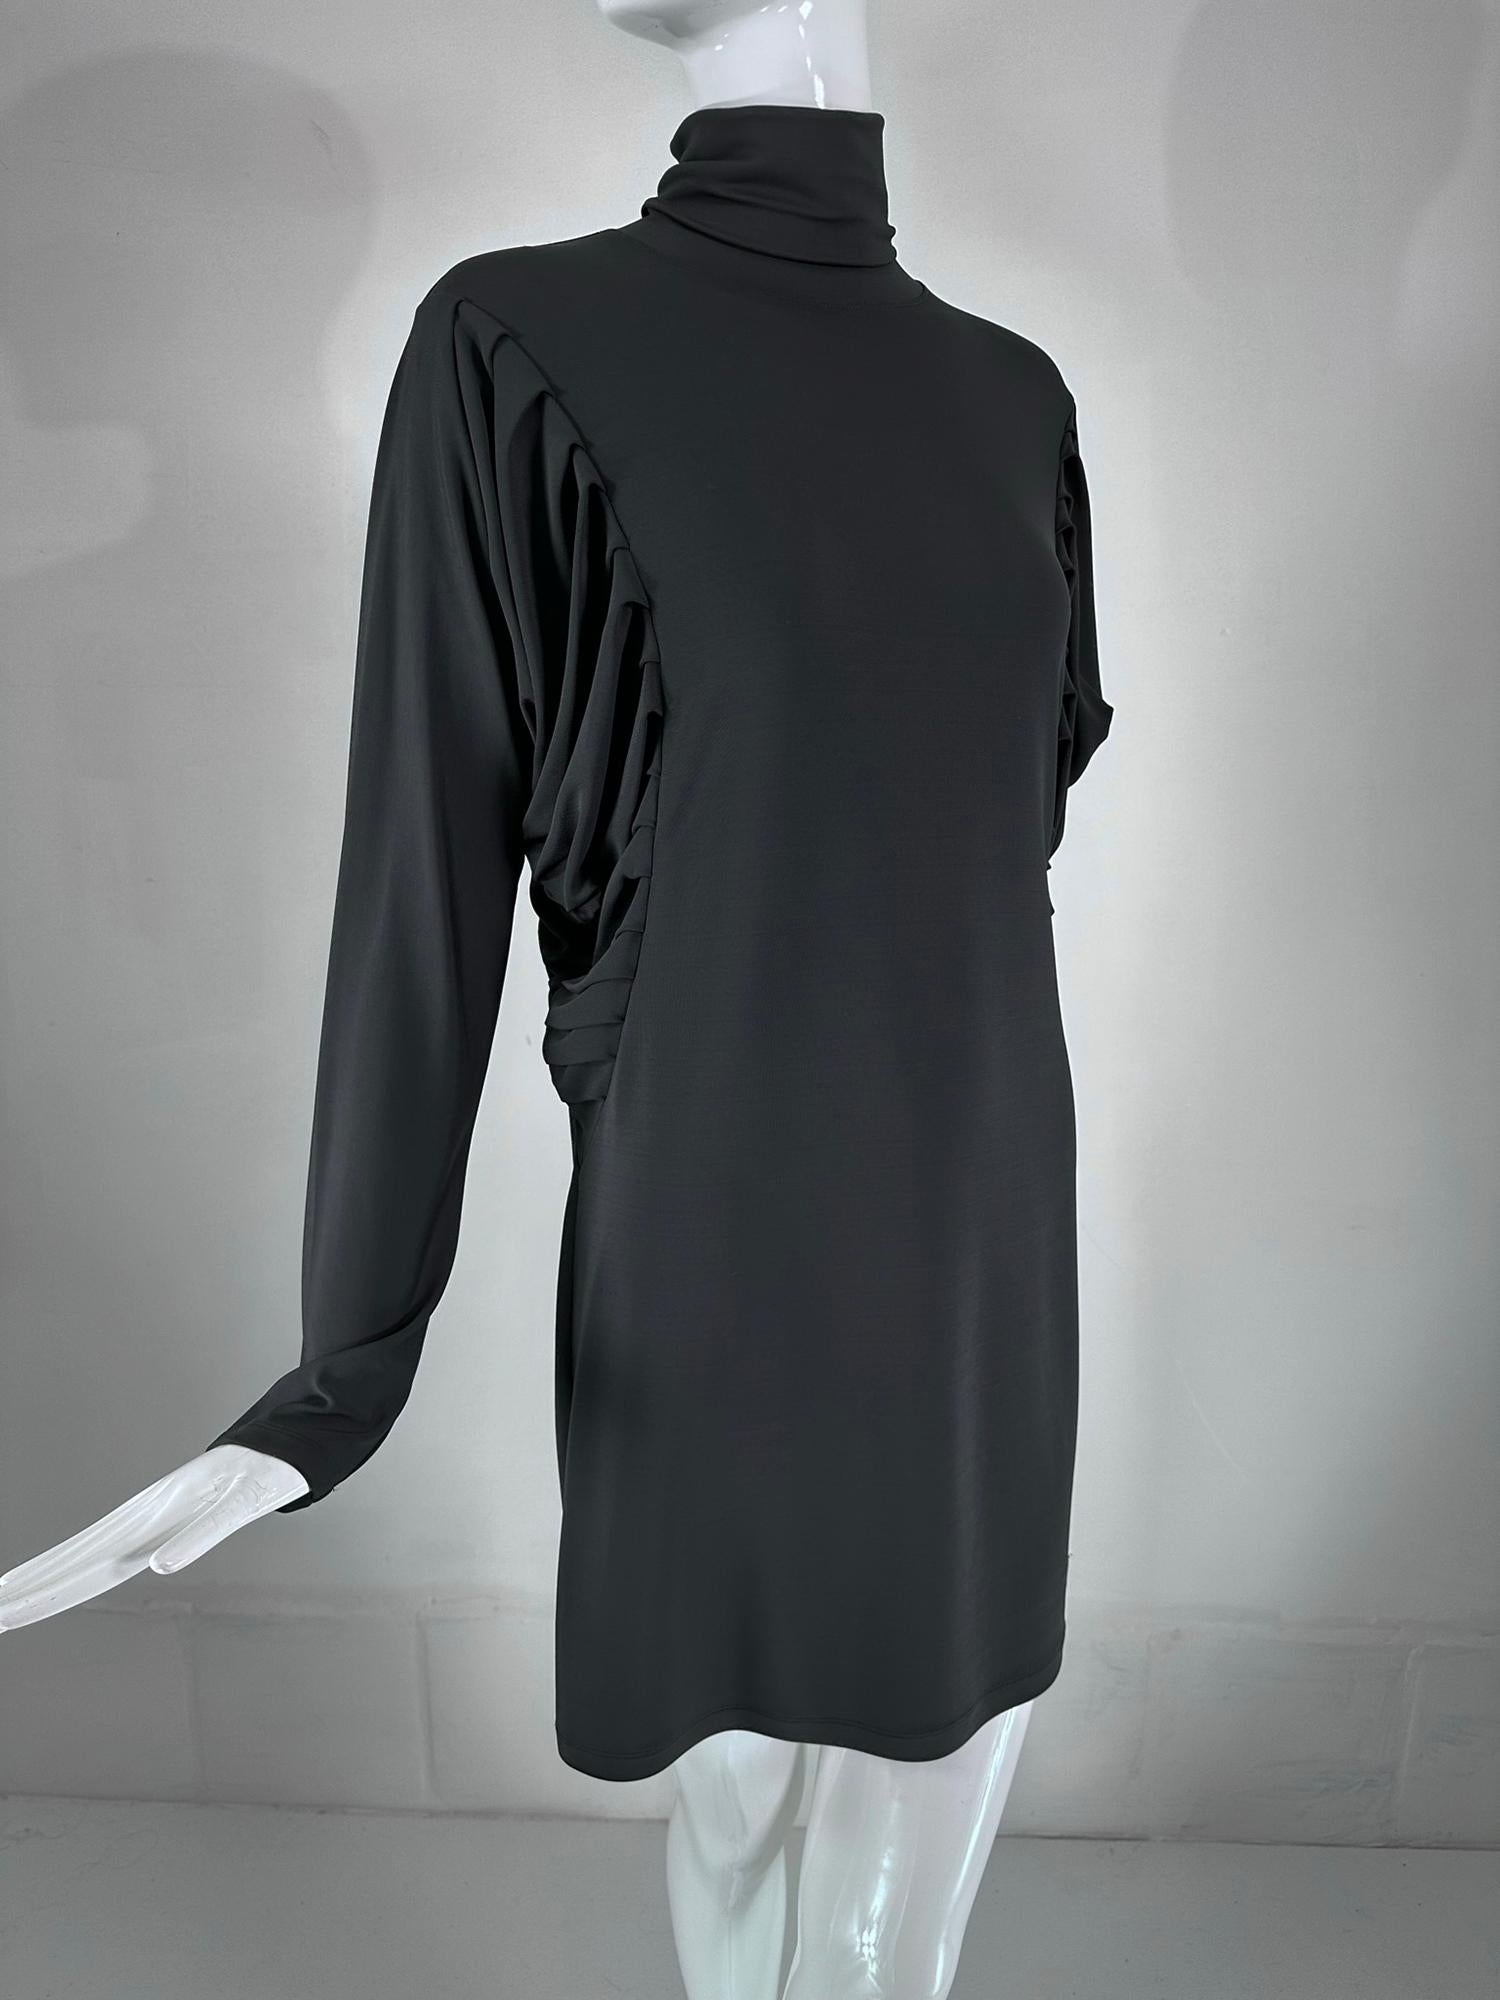 Fendi silky black jersey pleated bat wing turtle neck dress marked size 40. Pull on stretch jersey dress has a turtle neck, long bat wing style, with pleats at the underside of the upper arm, fitted at the lower part of the arm. The dress is cut